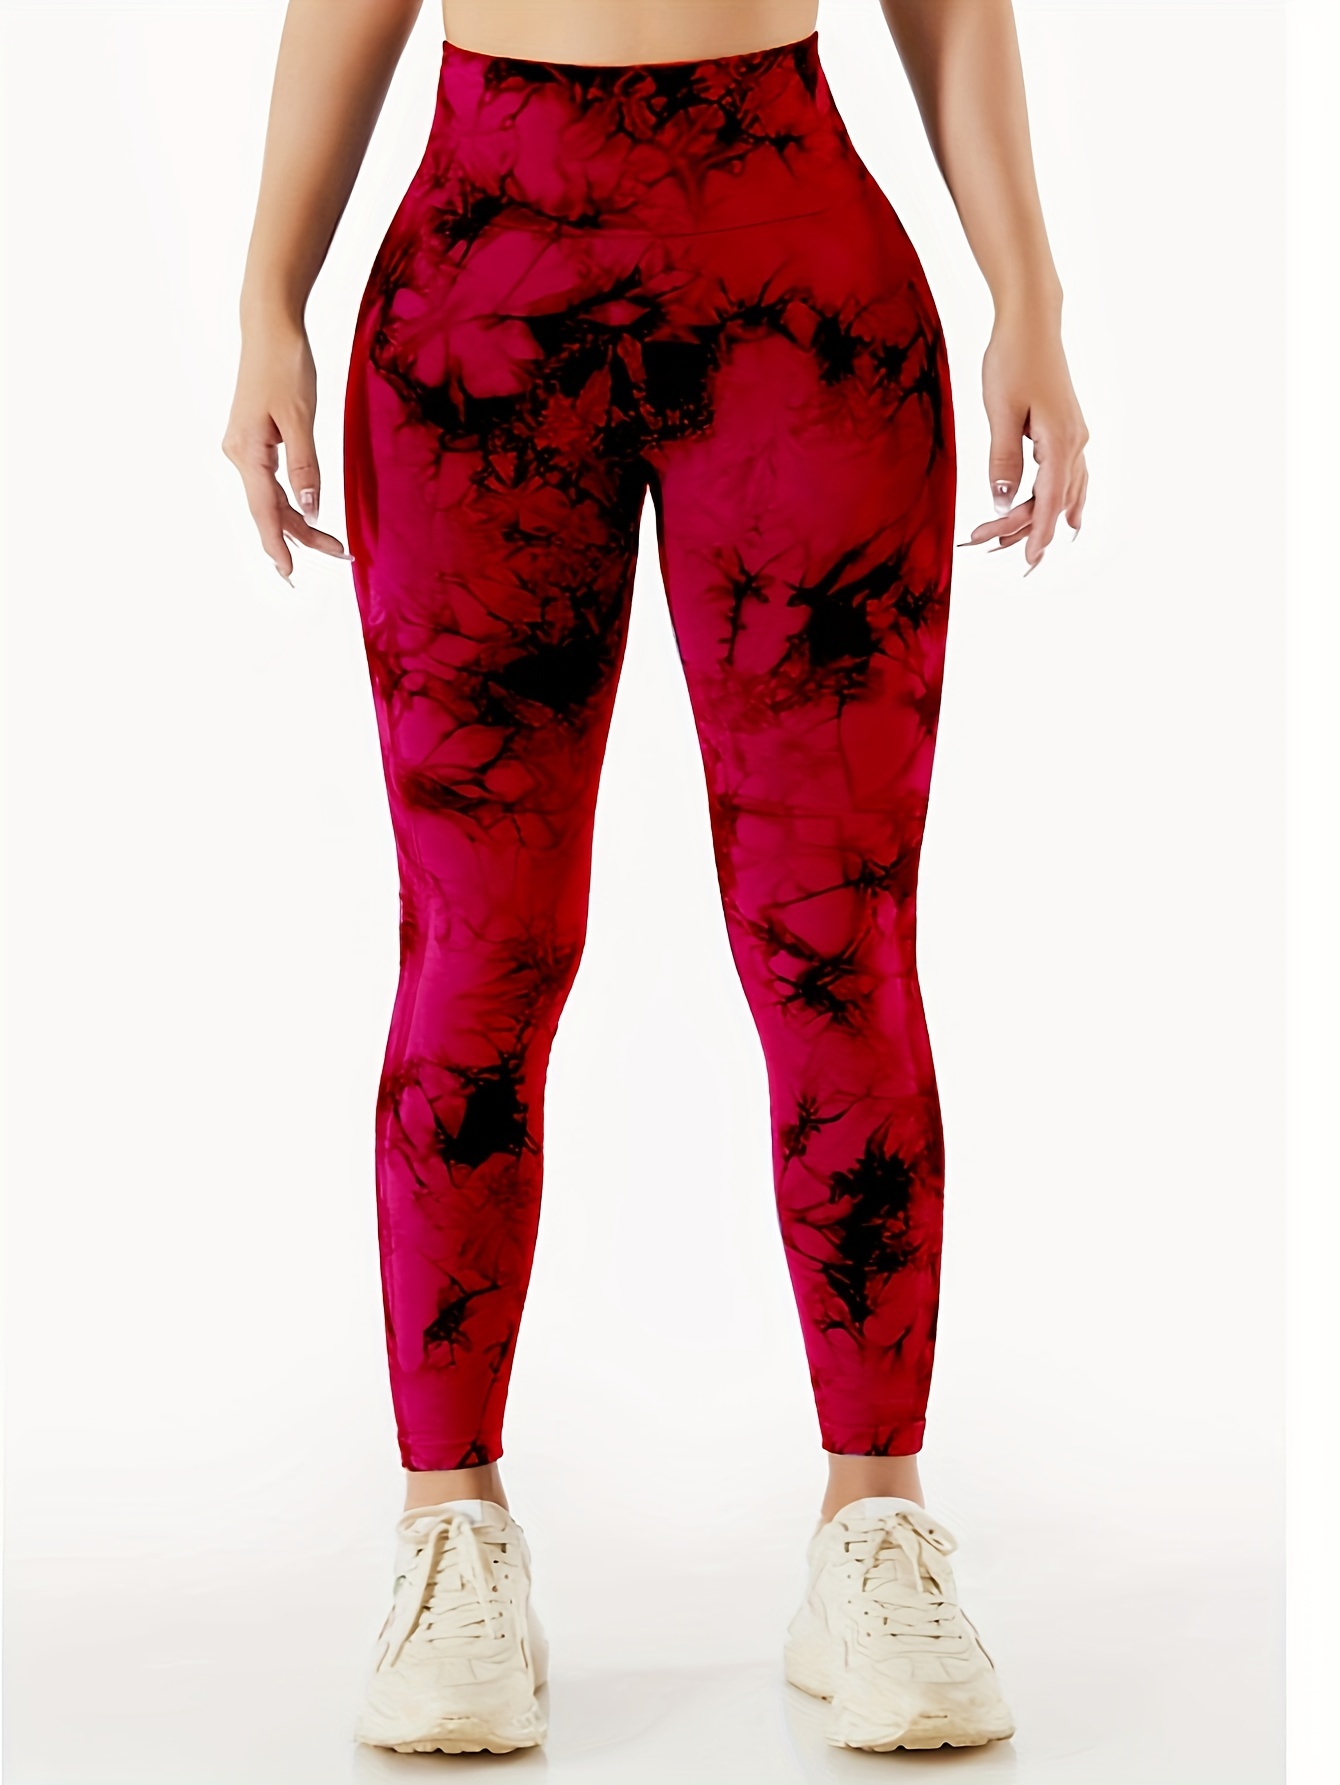 Black Red Tie Dye Leggings With Pockets for Women With 5 High